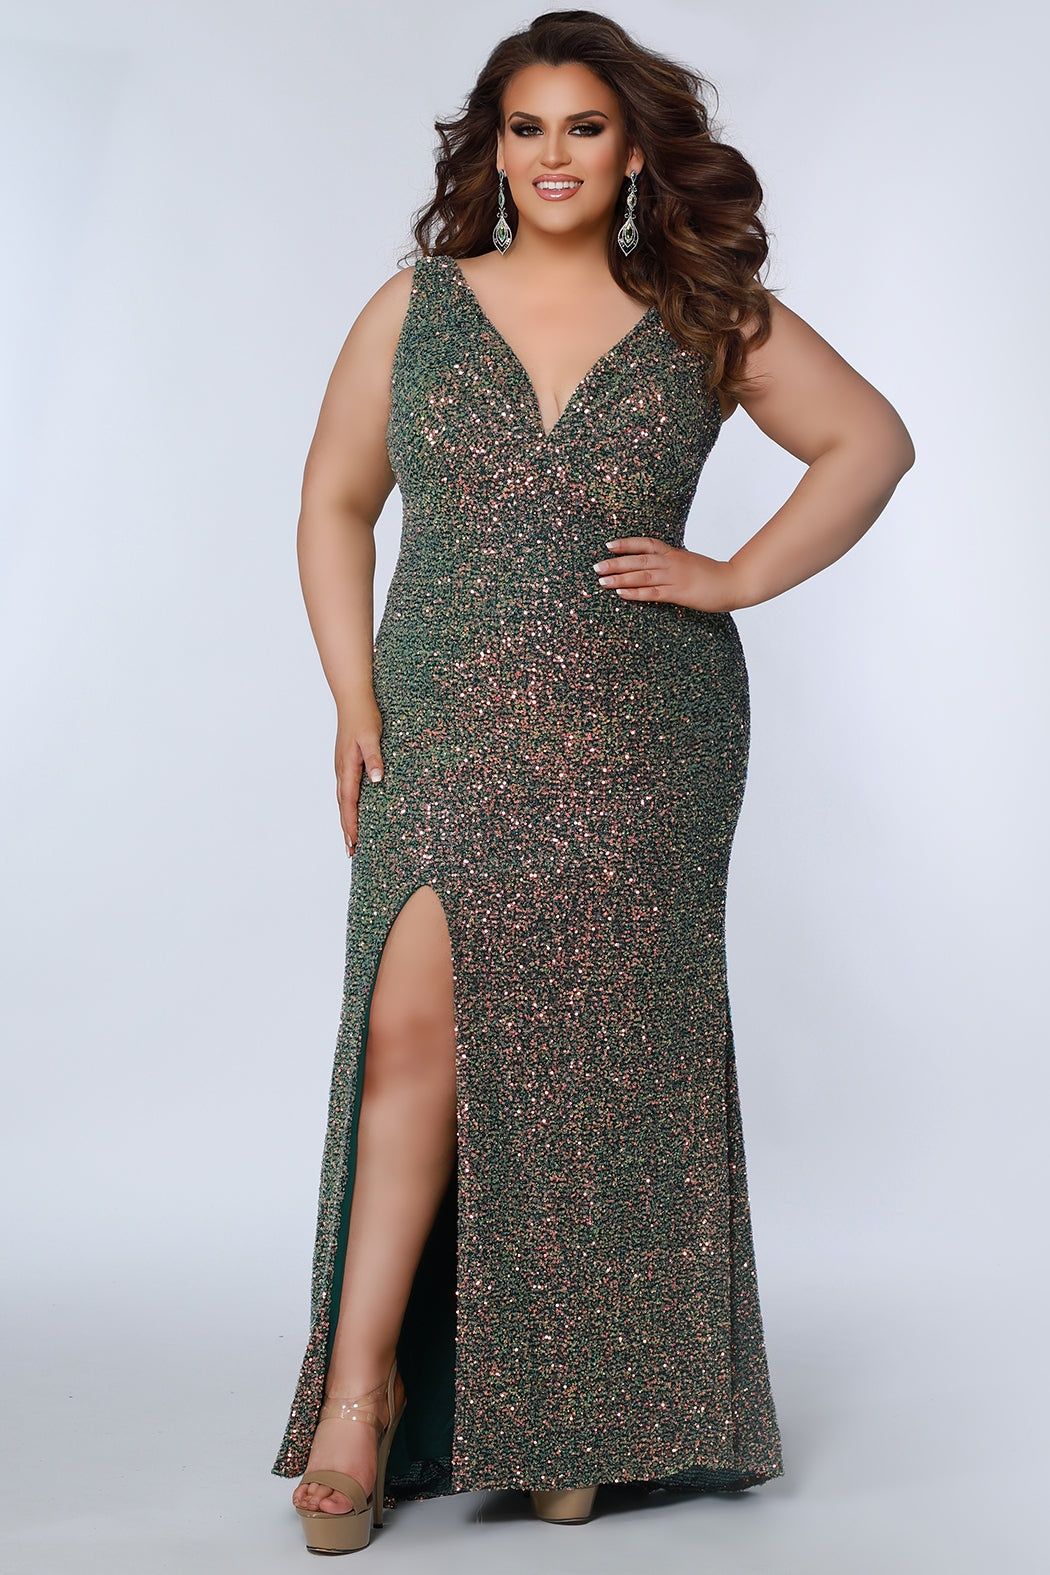 Style SC7339 Sydney's Closet Plus Size 28 Prom Sequined Green Side Slit Dress on Queenly